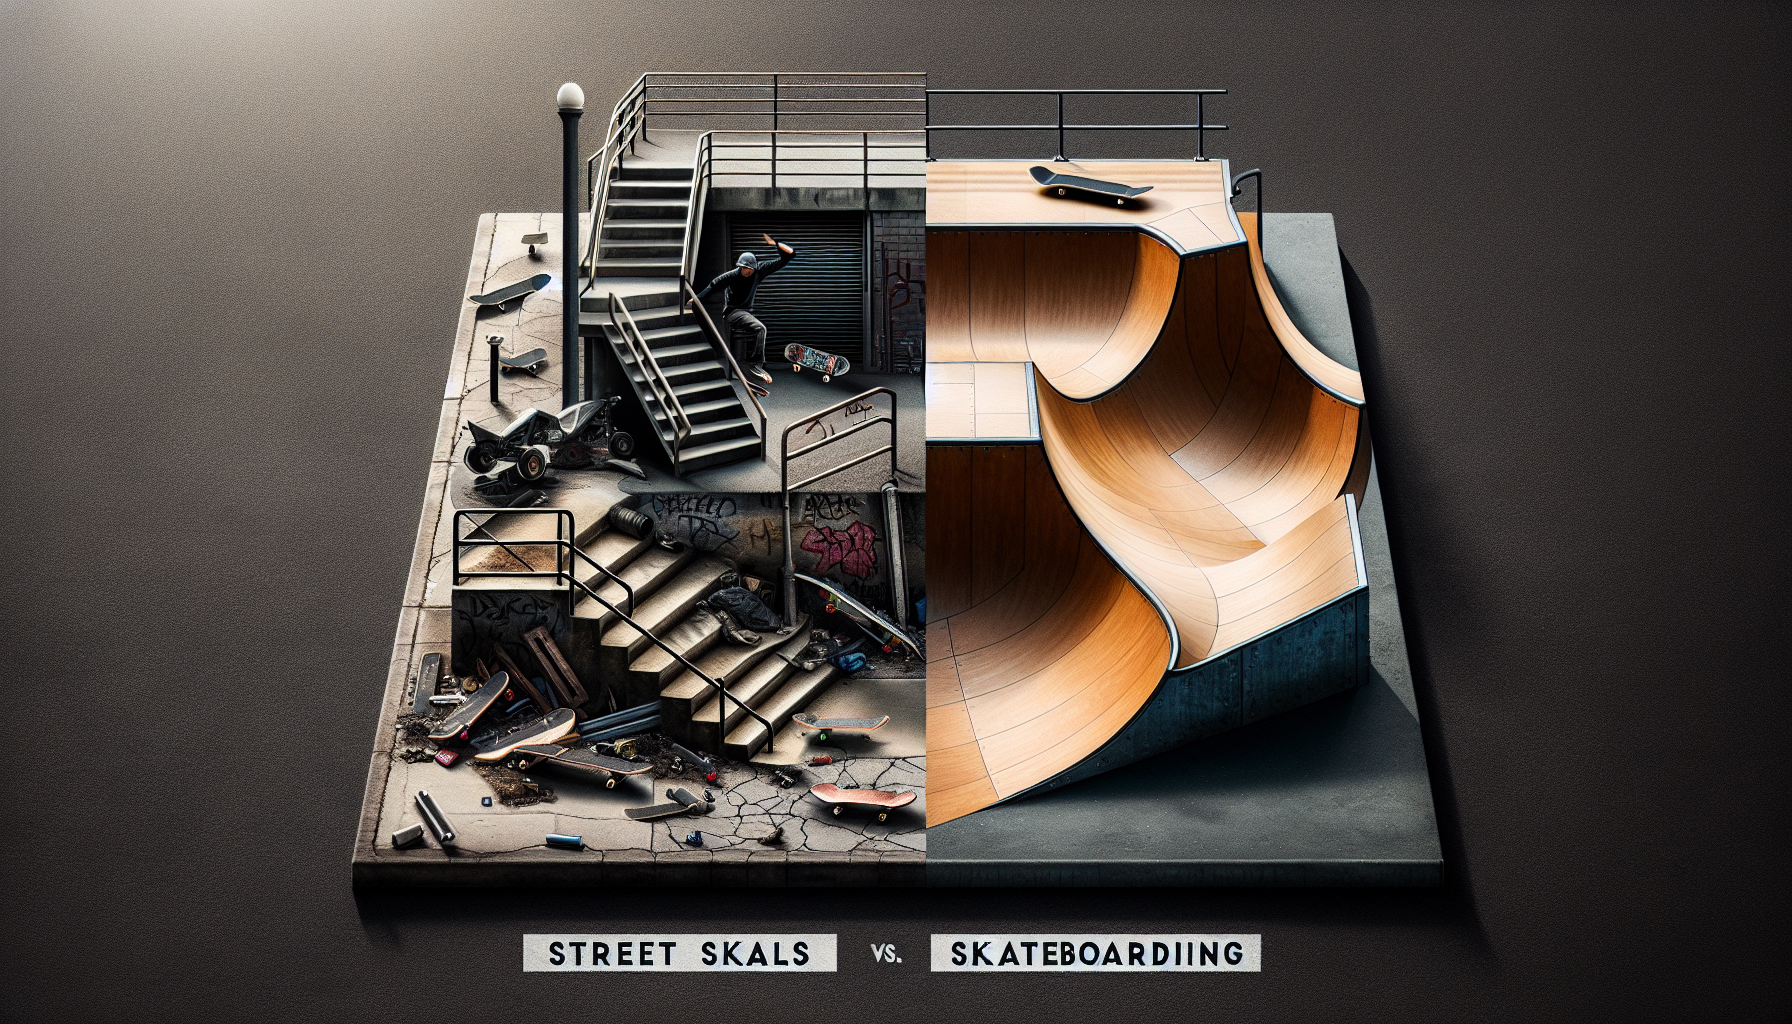 What Are The Differences Between Street Skateboarding And Ramp Skateboarding?